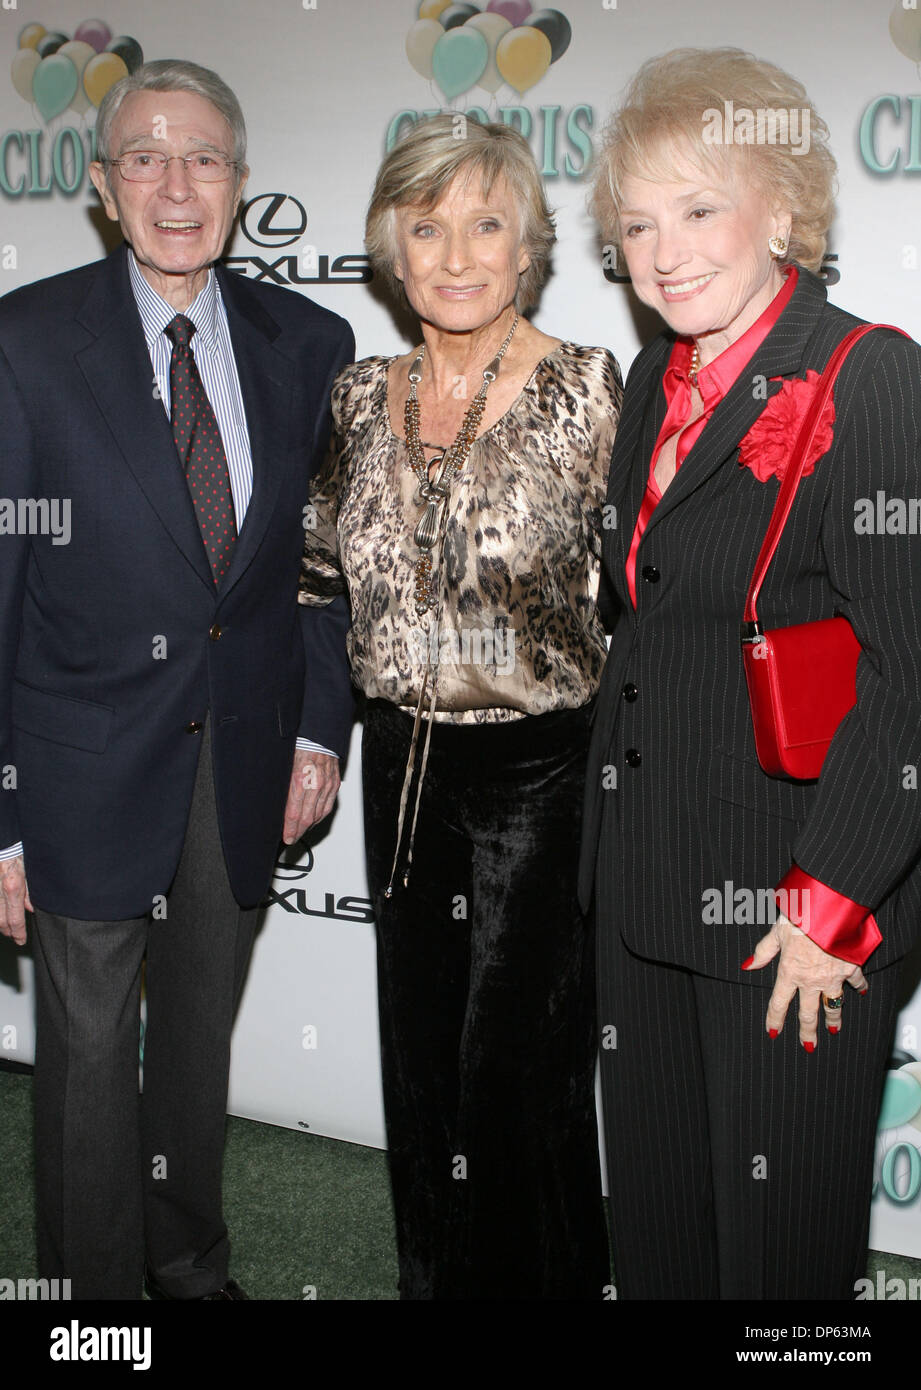 Oct 05, 2006; Beverly Hills, CA, USA; Actor ARMY ARCHERD with CLORIS LEACHMAN and his wife arrive at the Cloris Leachman 60 years in show business celebration. Mandatory Credit: Photo by Marianna Day Massey/ZUMA Press. (©) Copyright 2006 by Marianna Day Massey Stock Photo